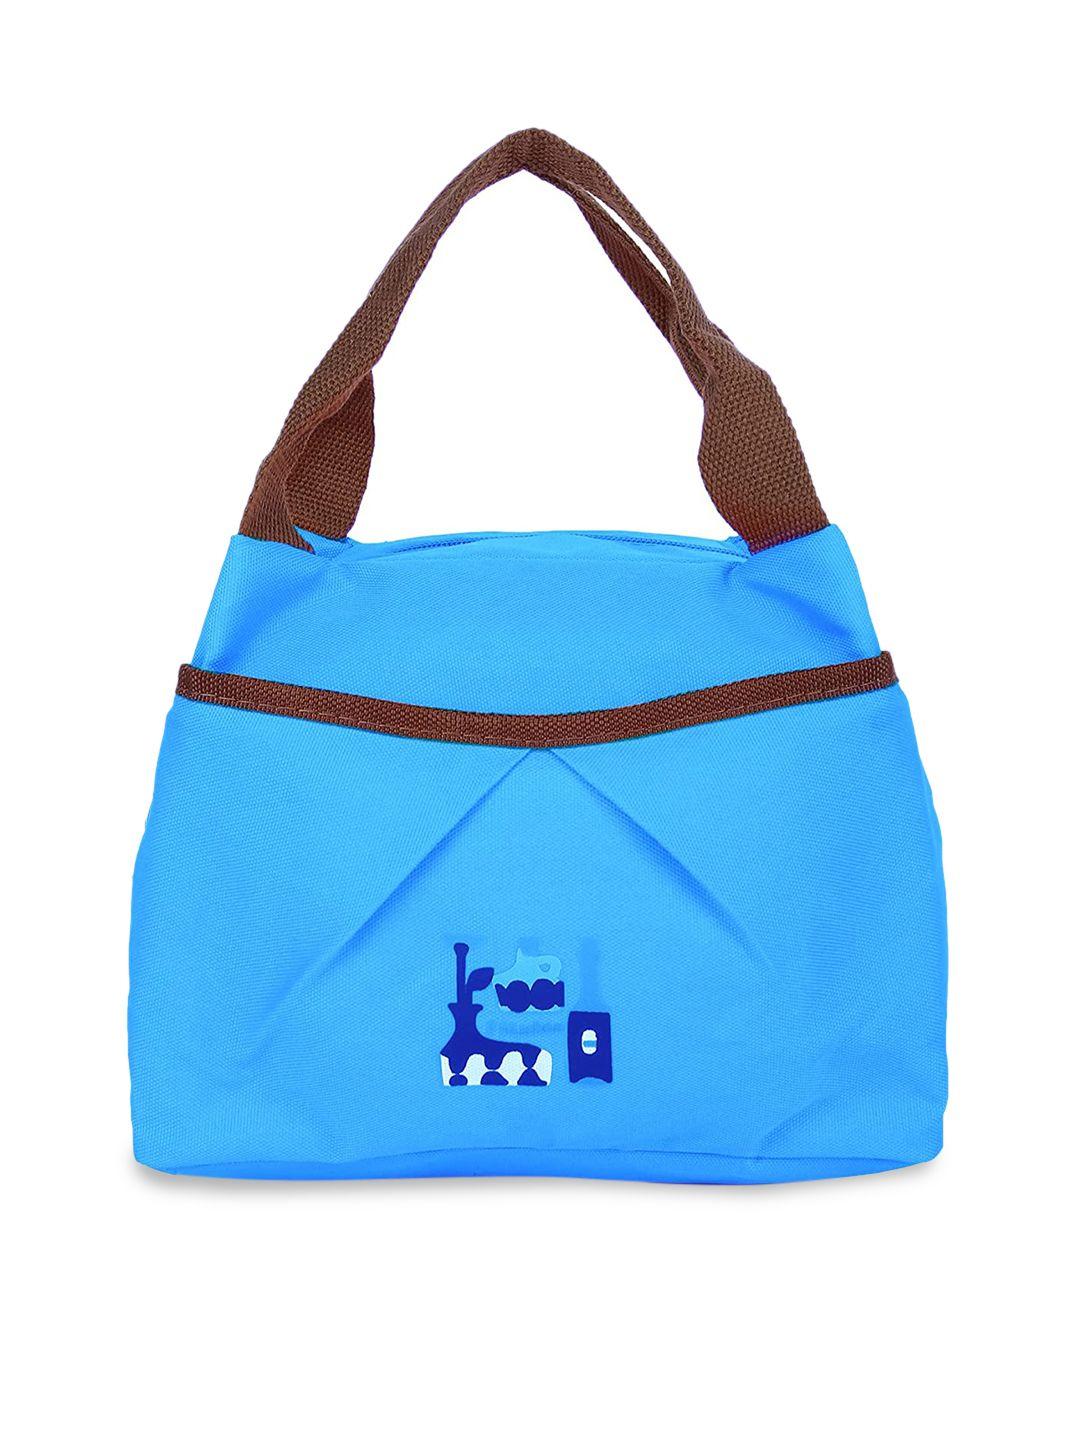 instabuyz insulated reusable lunch bag